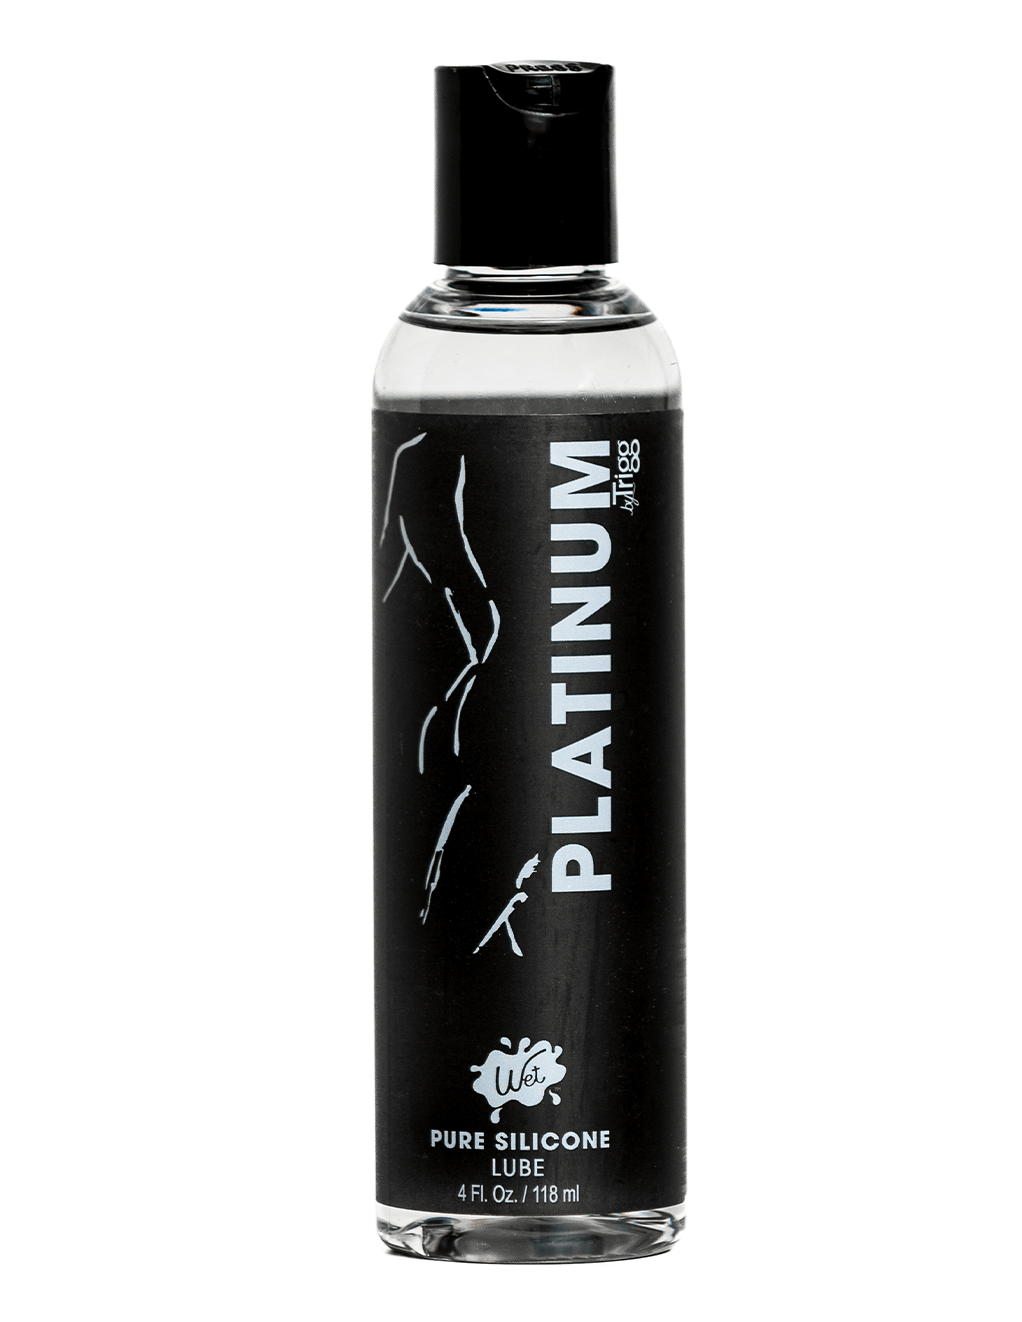 Wet Platinum Silicone Based Personal Lubricant 4oz